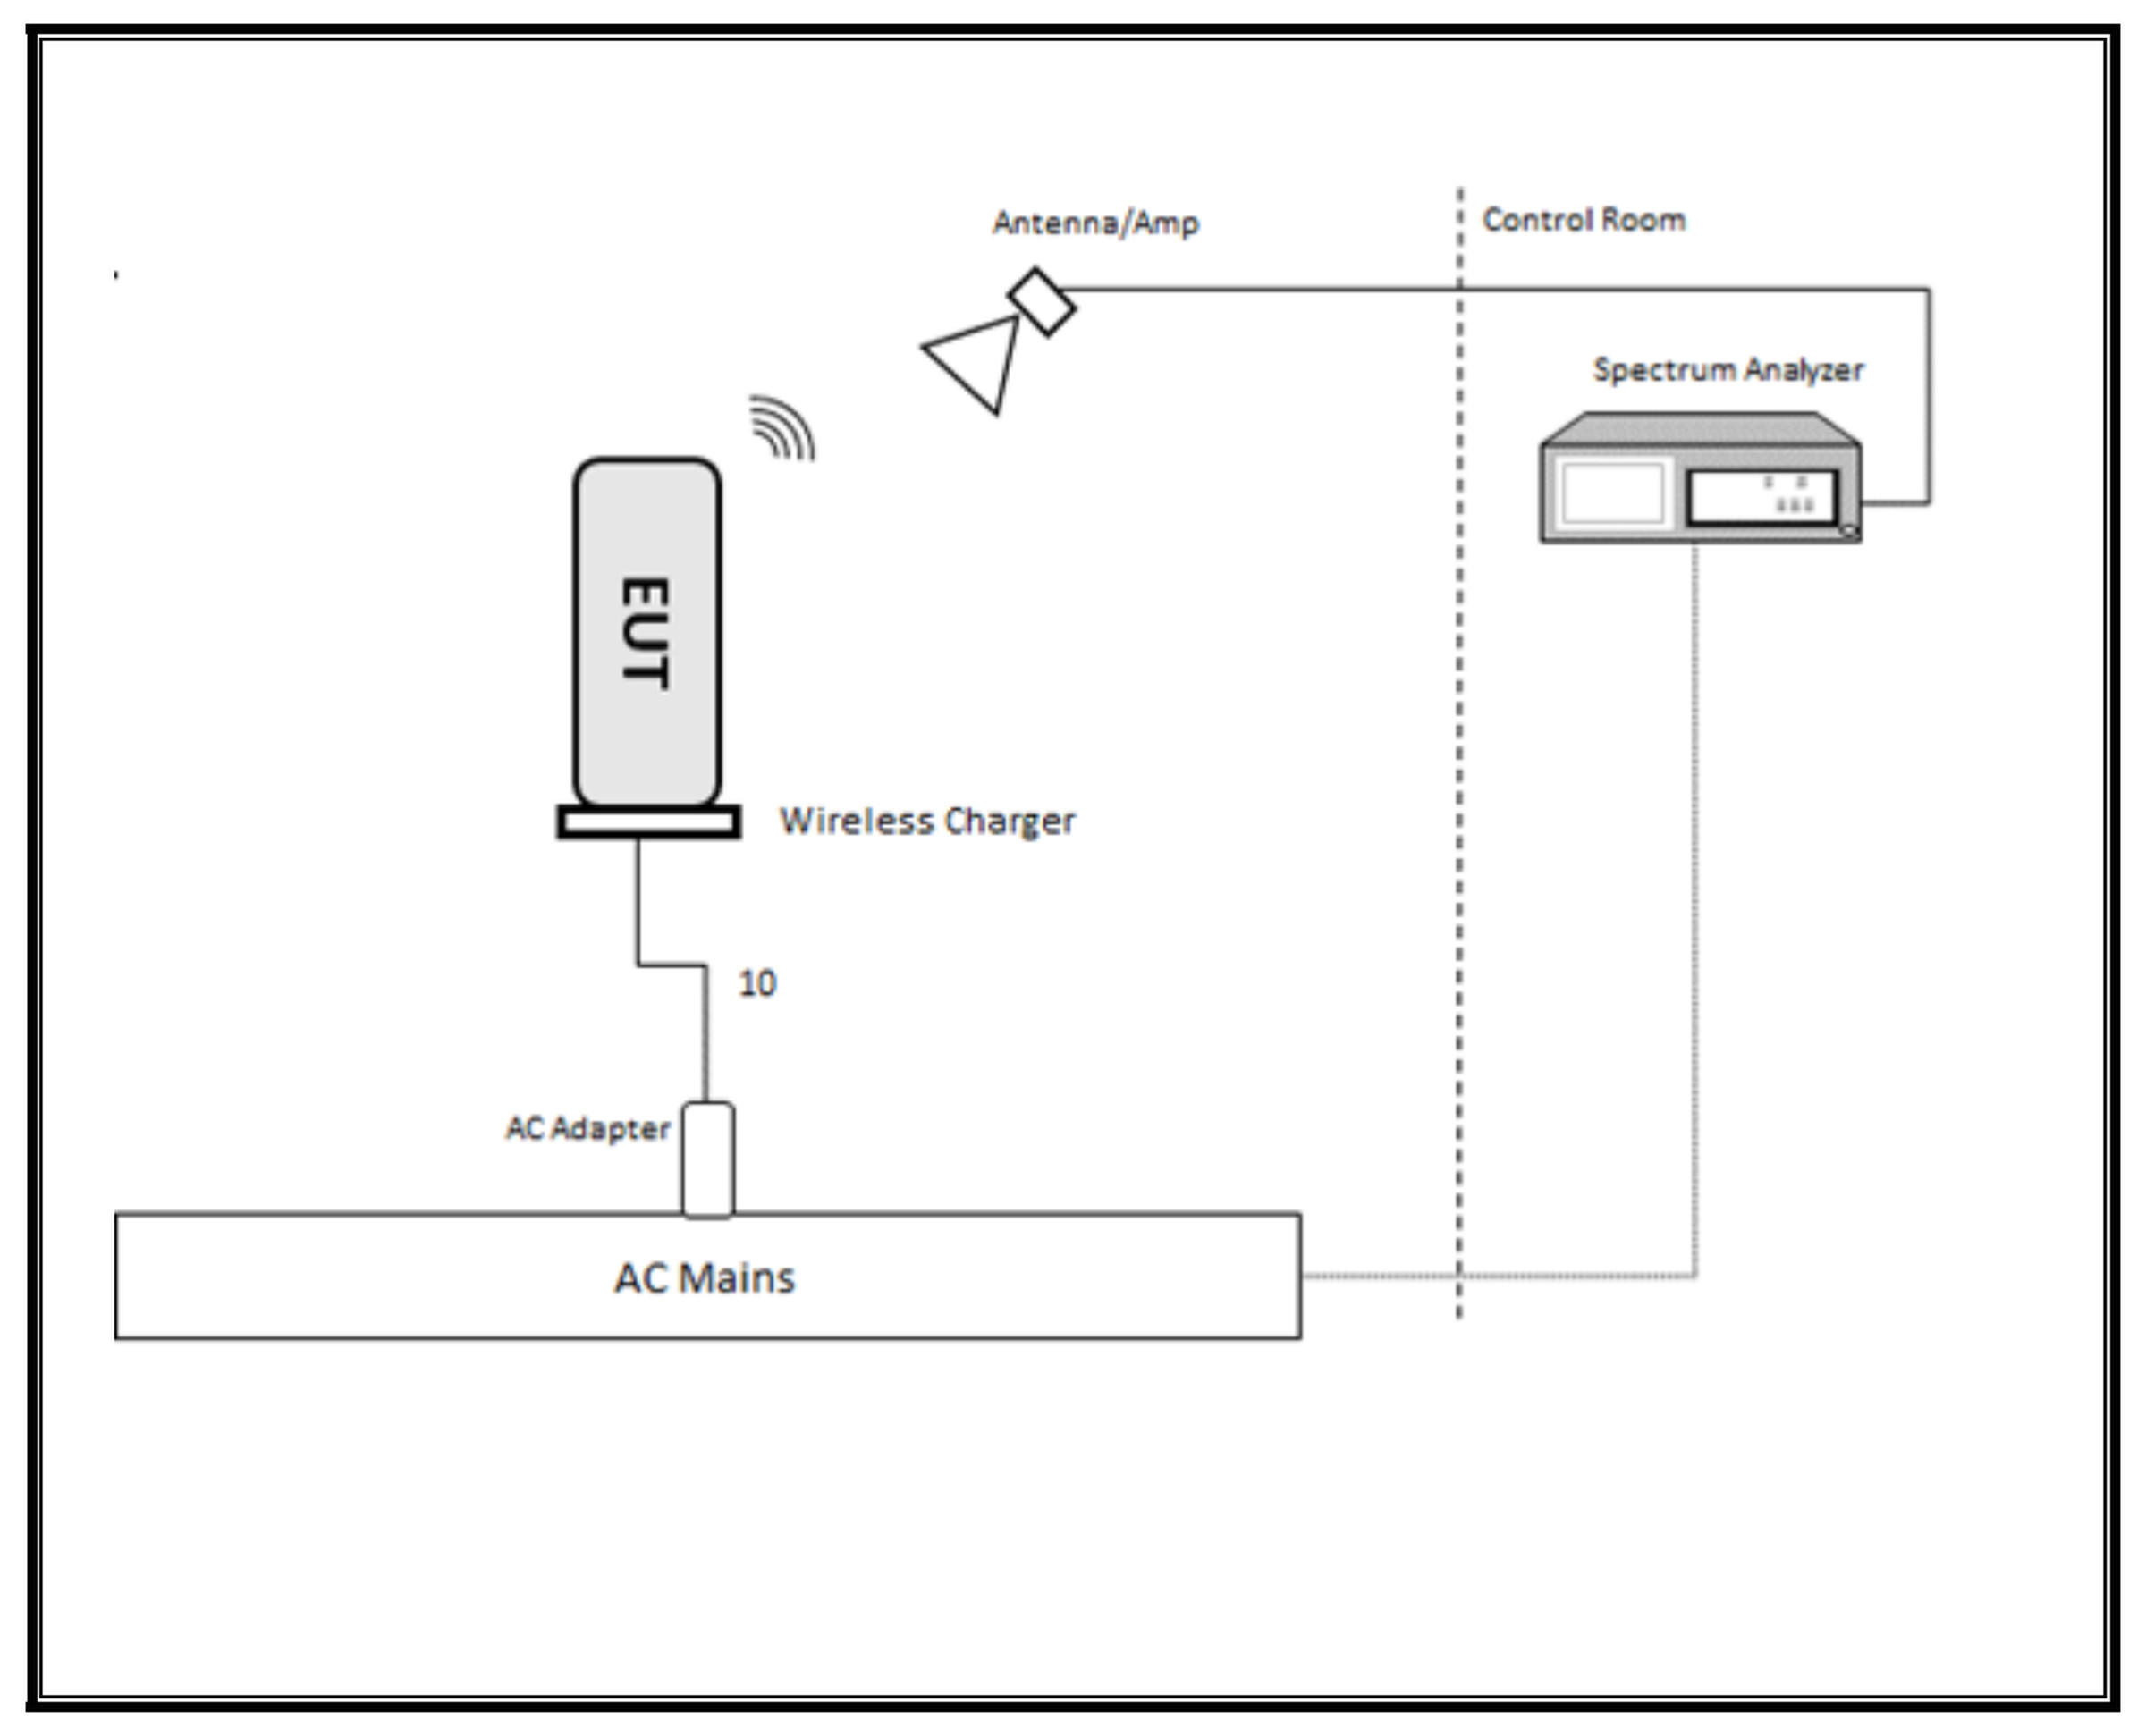 FCC diagrams reveal a wireless charging dock.